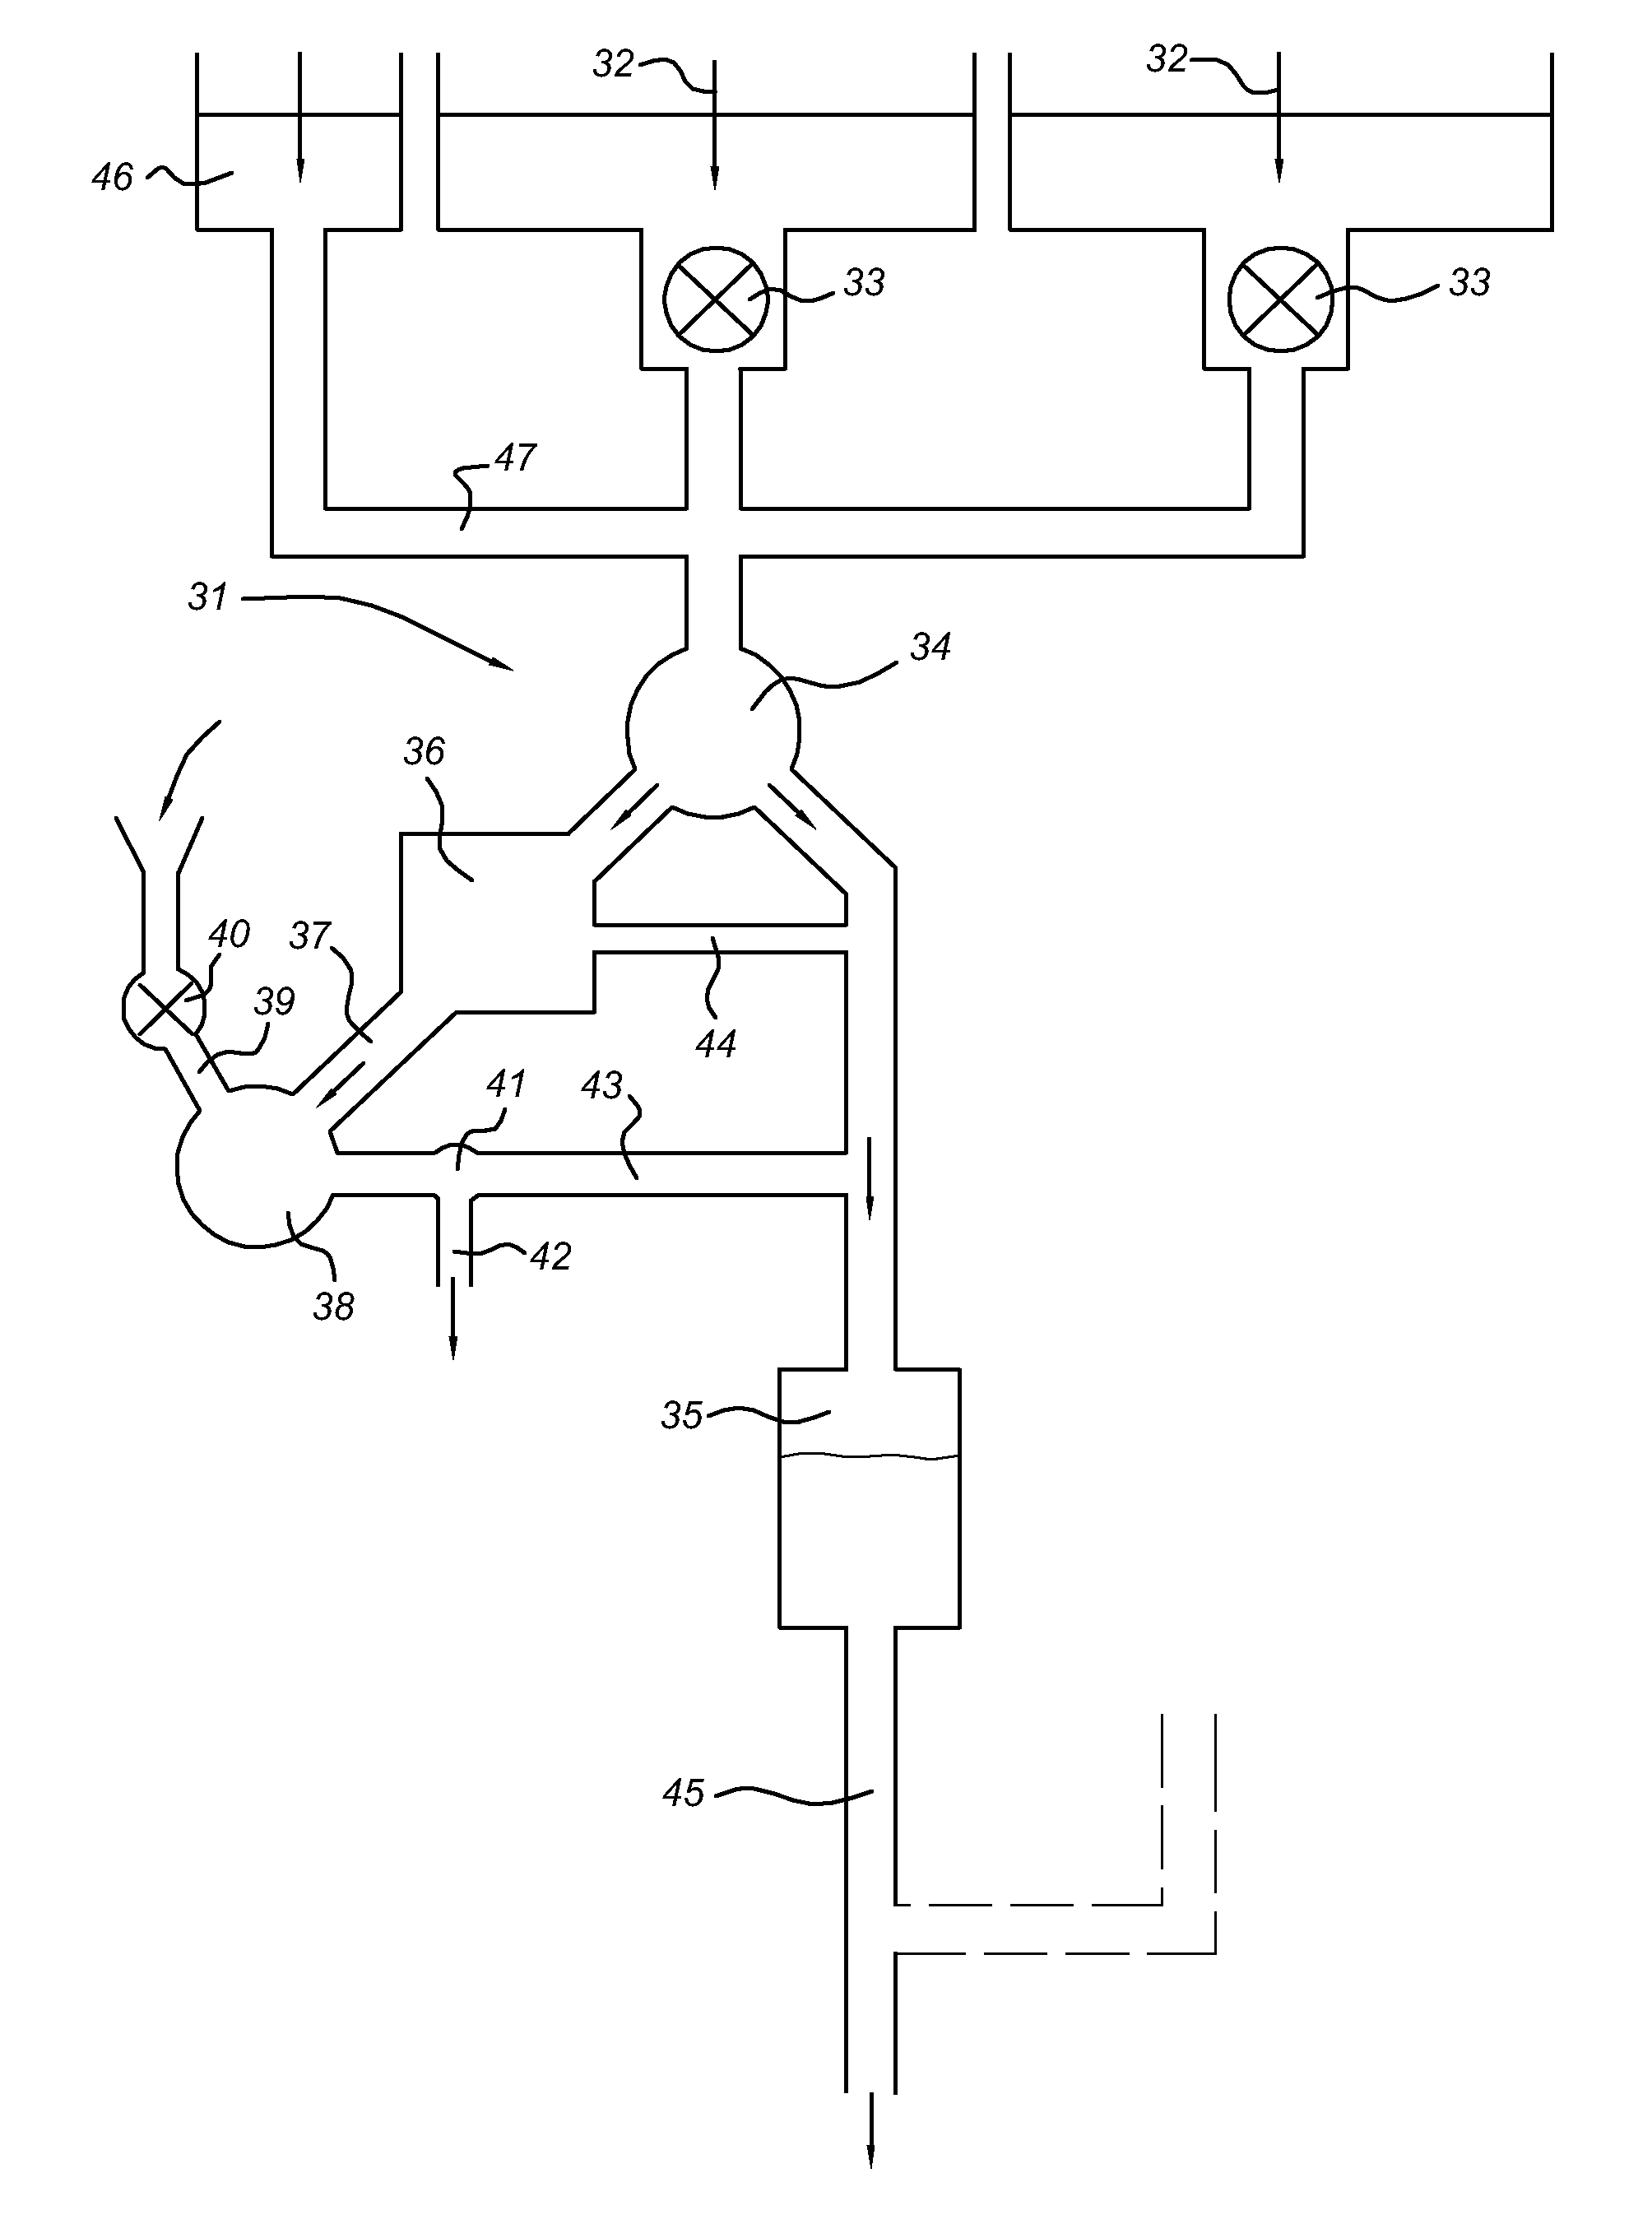 Method and system for treating different waste streams